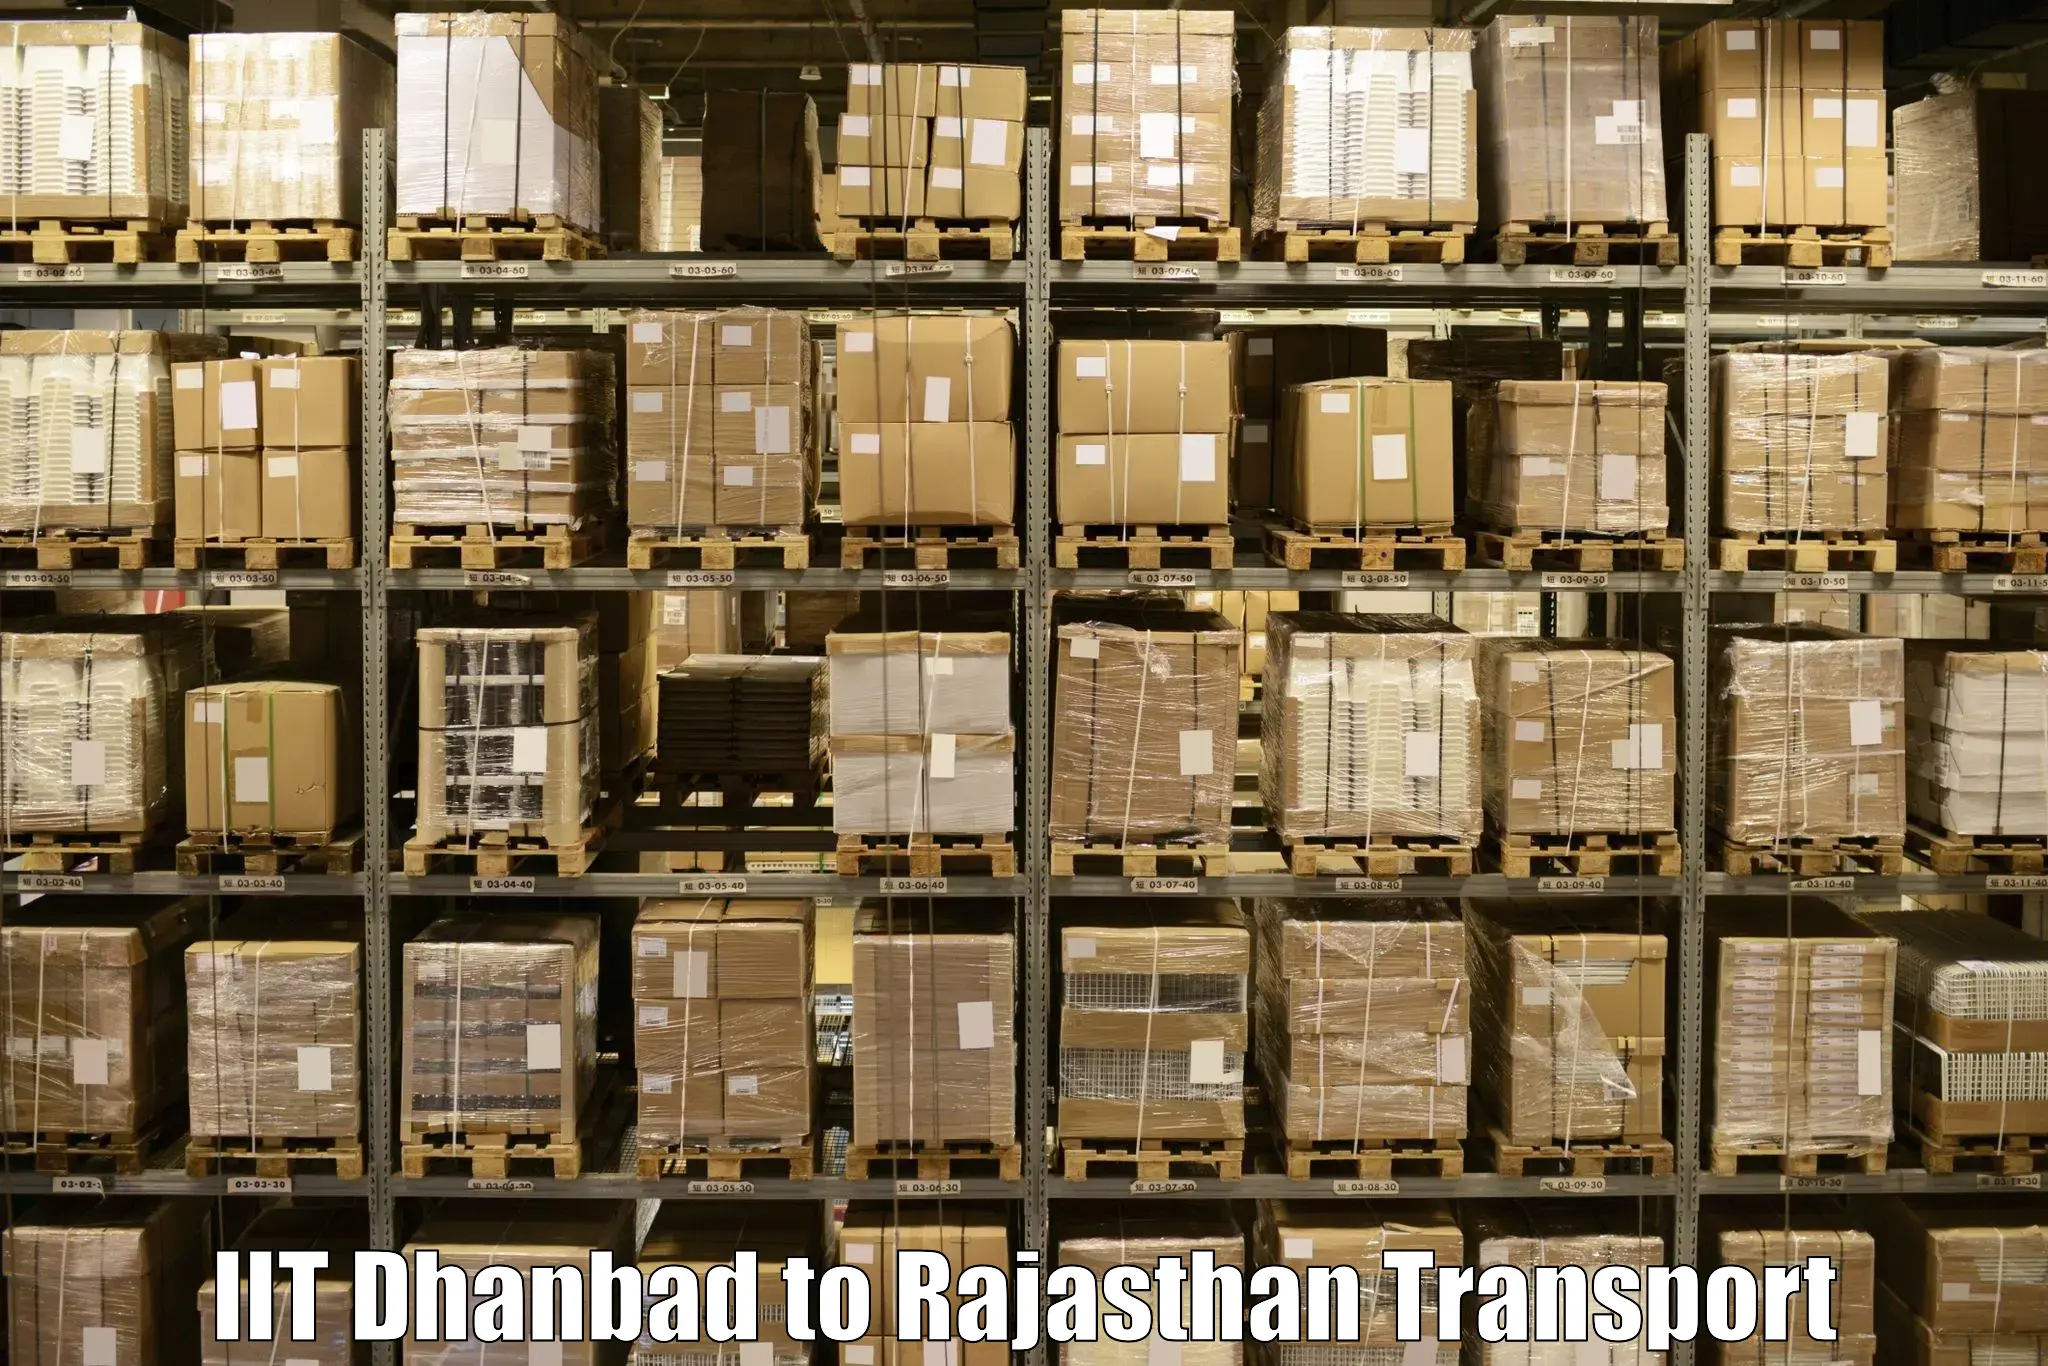 Daily transport service IIT Dhanbad to Sikar